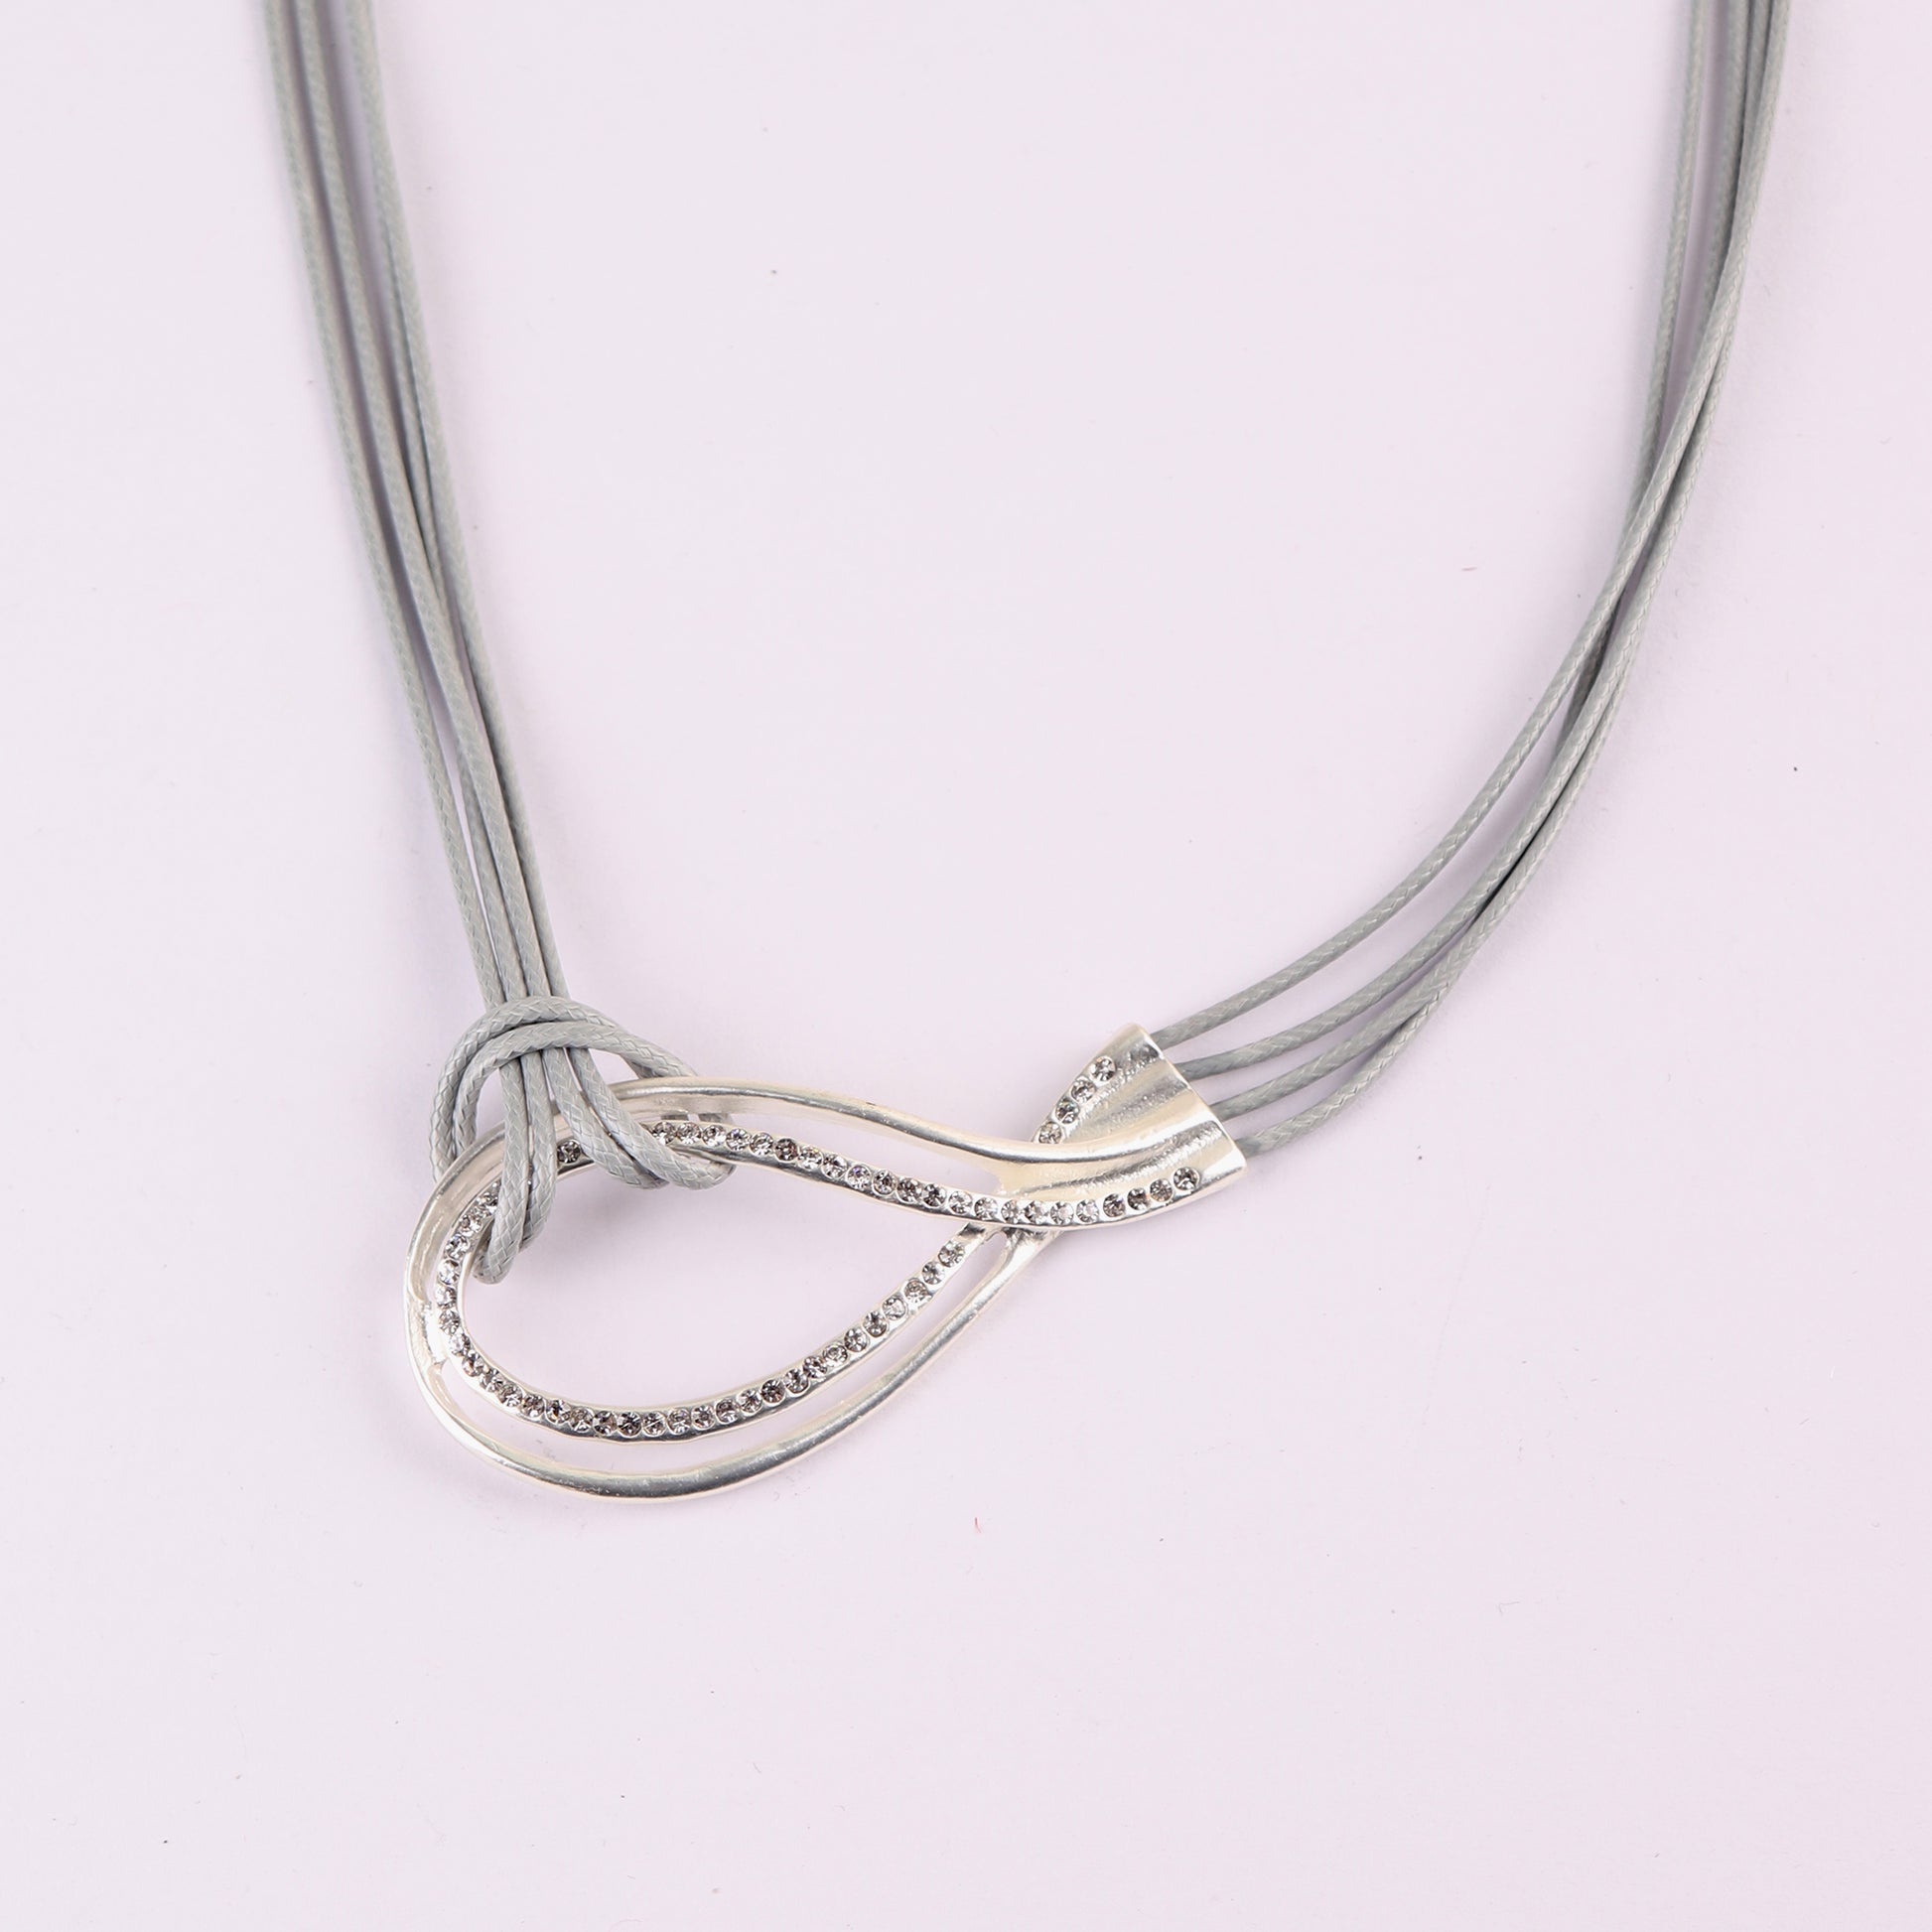 Necklace,Twisted Loop Necklace in Grey - Cippele Multi Store